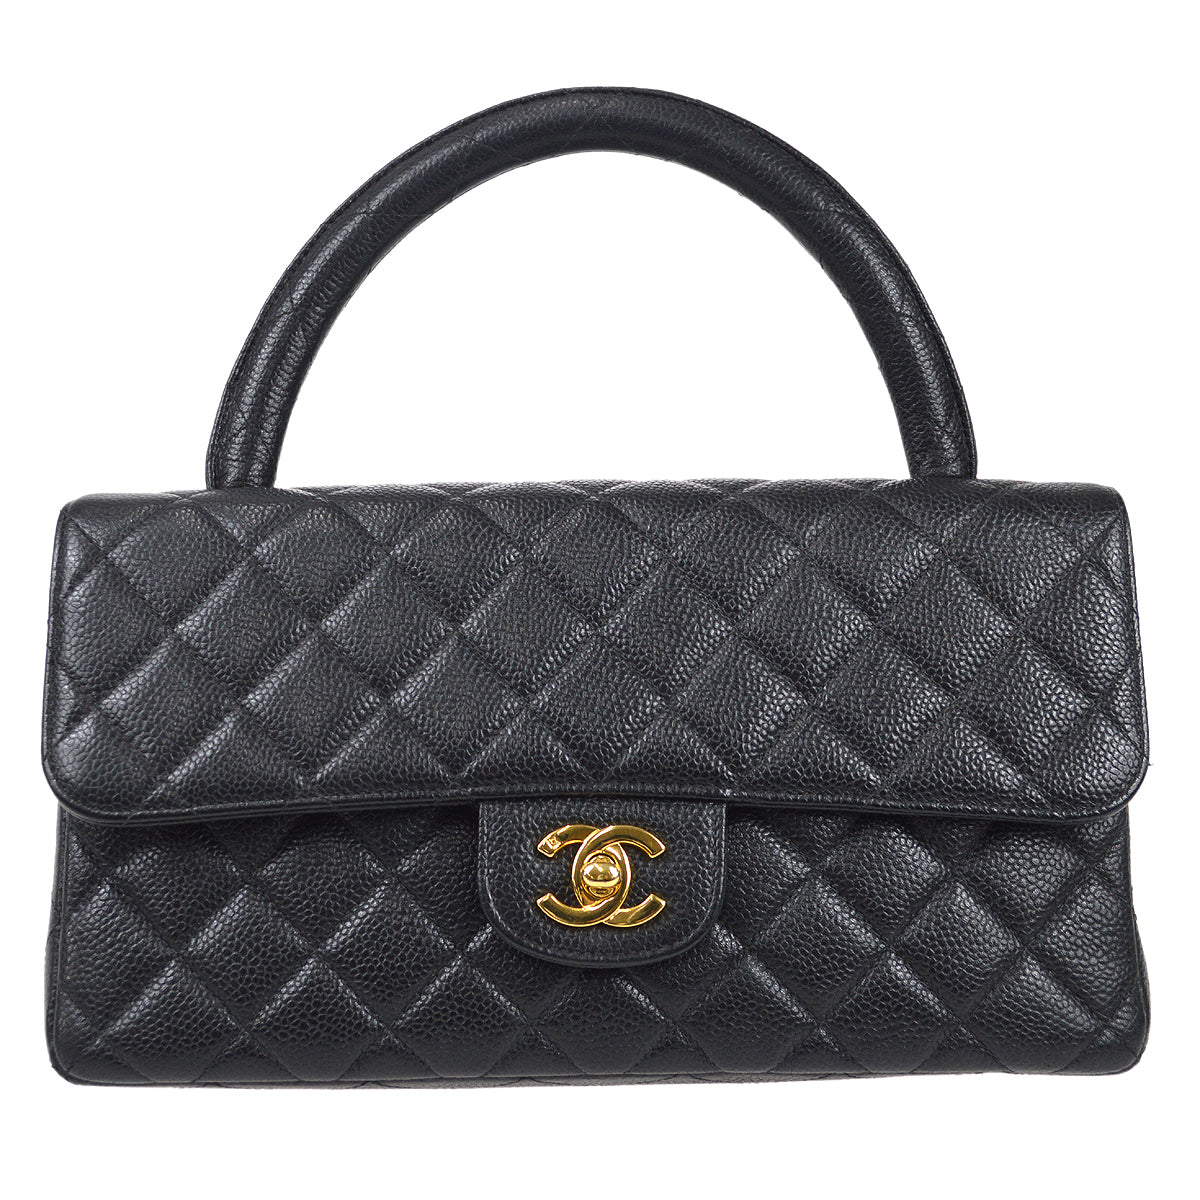 Guide to Chanel classic flap bag | Chanel bag black, Used chanel bags,  Chanel bag